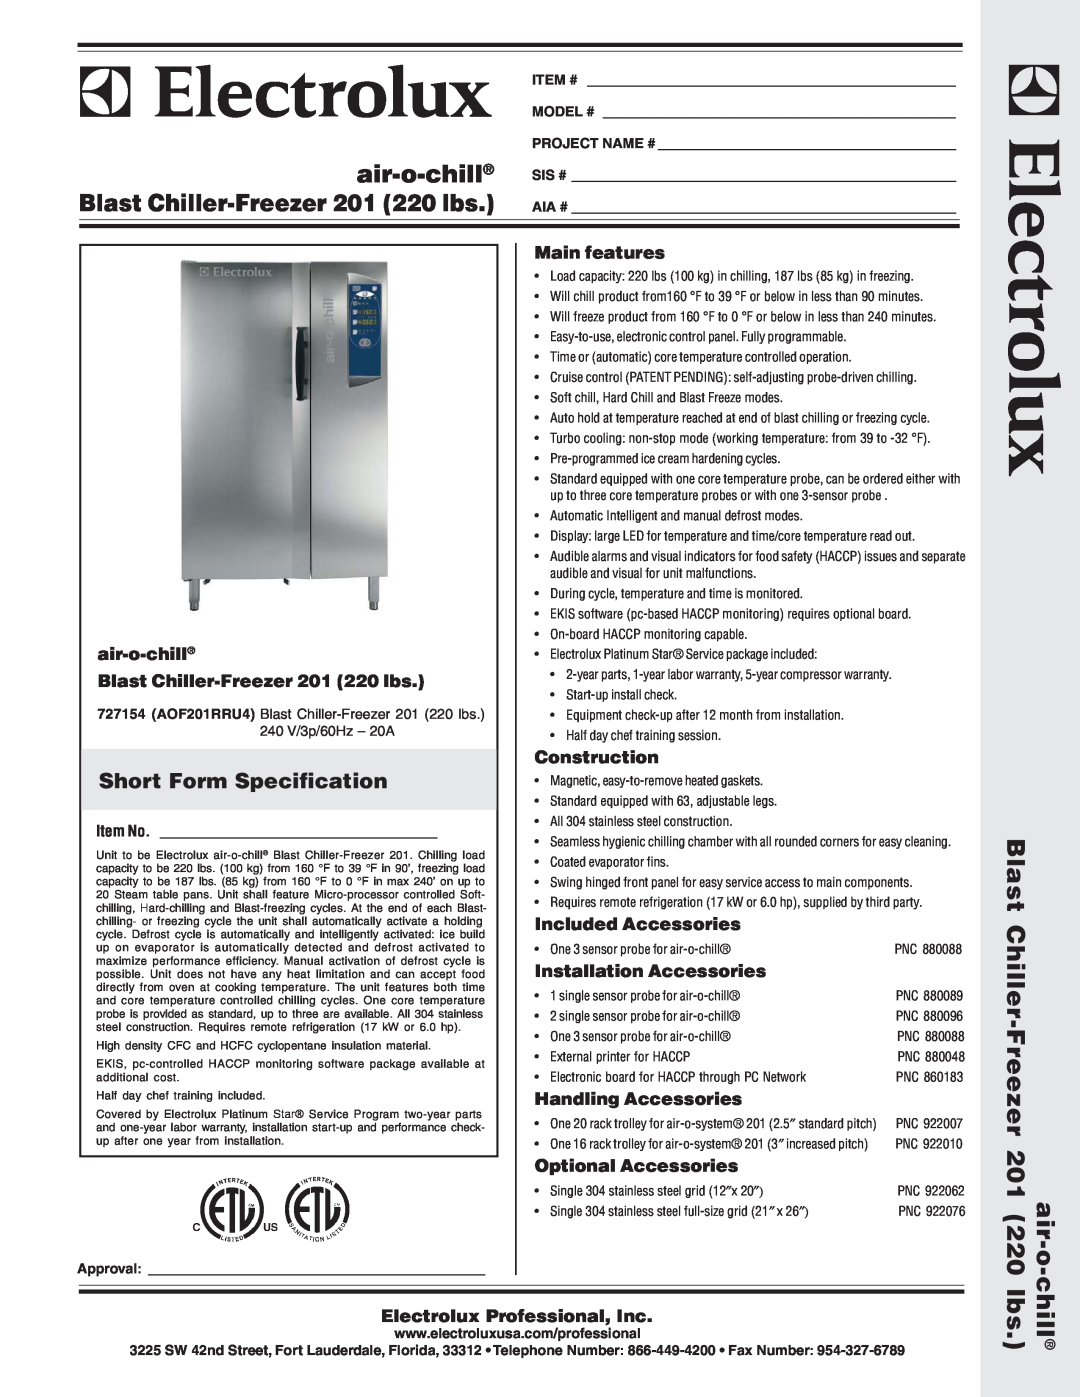 Electrolux AOF201RRU4 warranty Short Form Specification, air-o-chill Blast Chiller-Freezer 201 220 lbs, Main features 